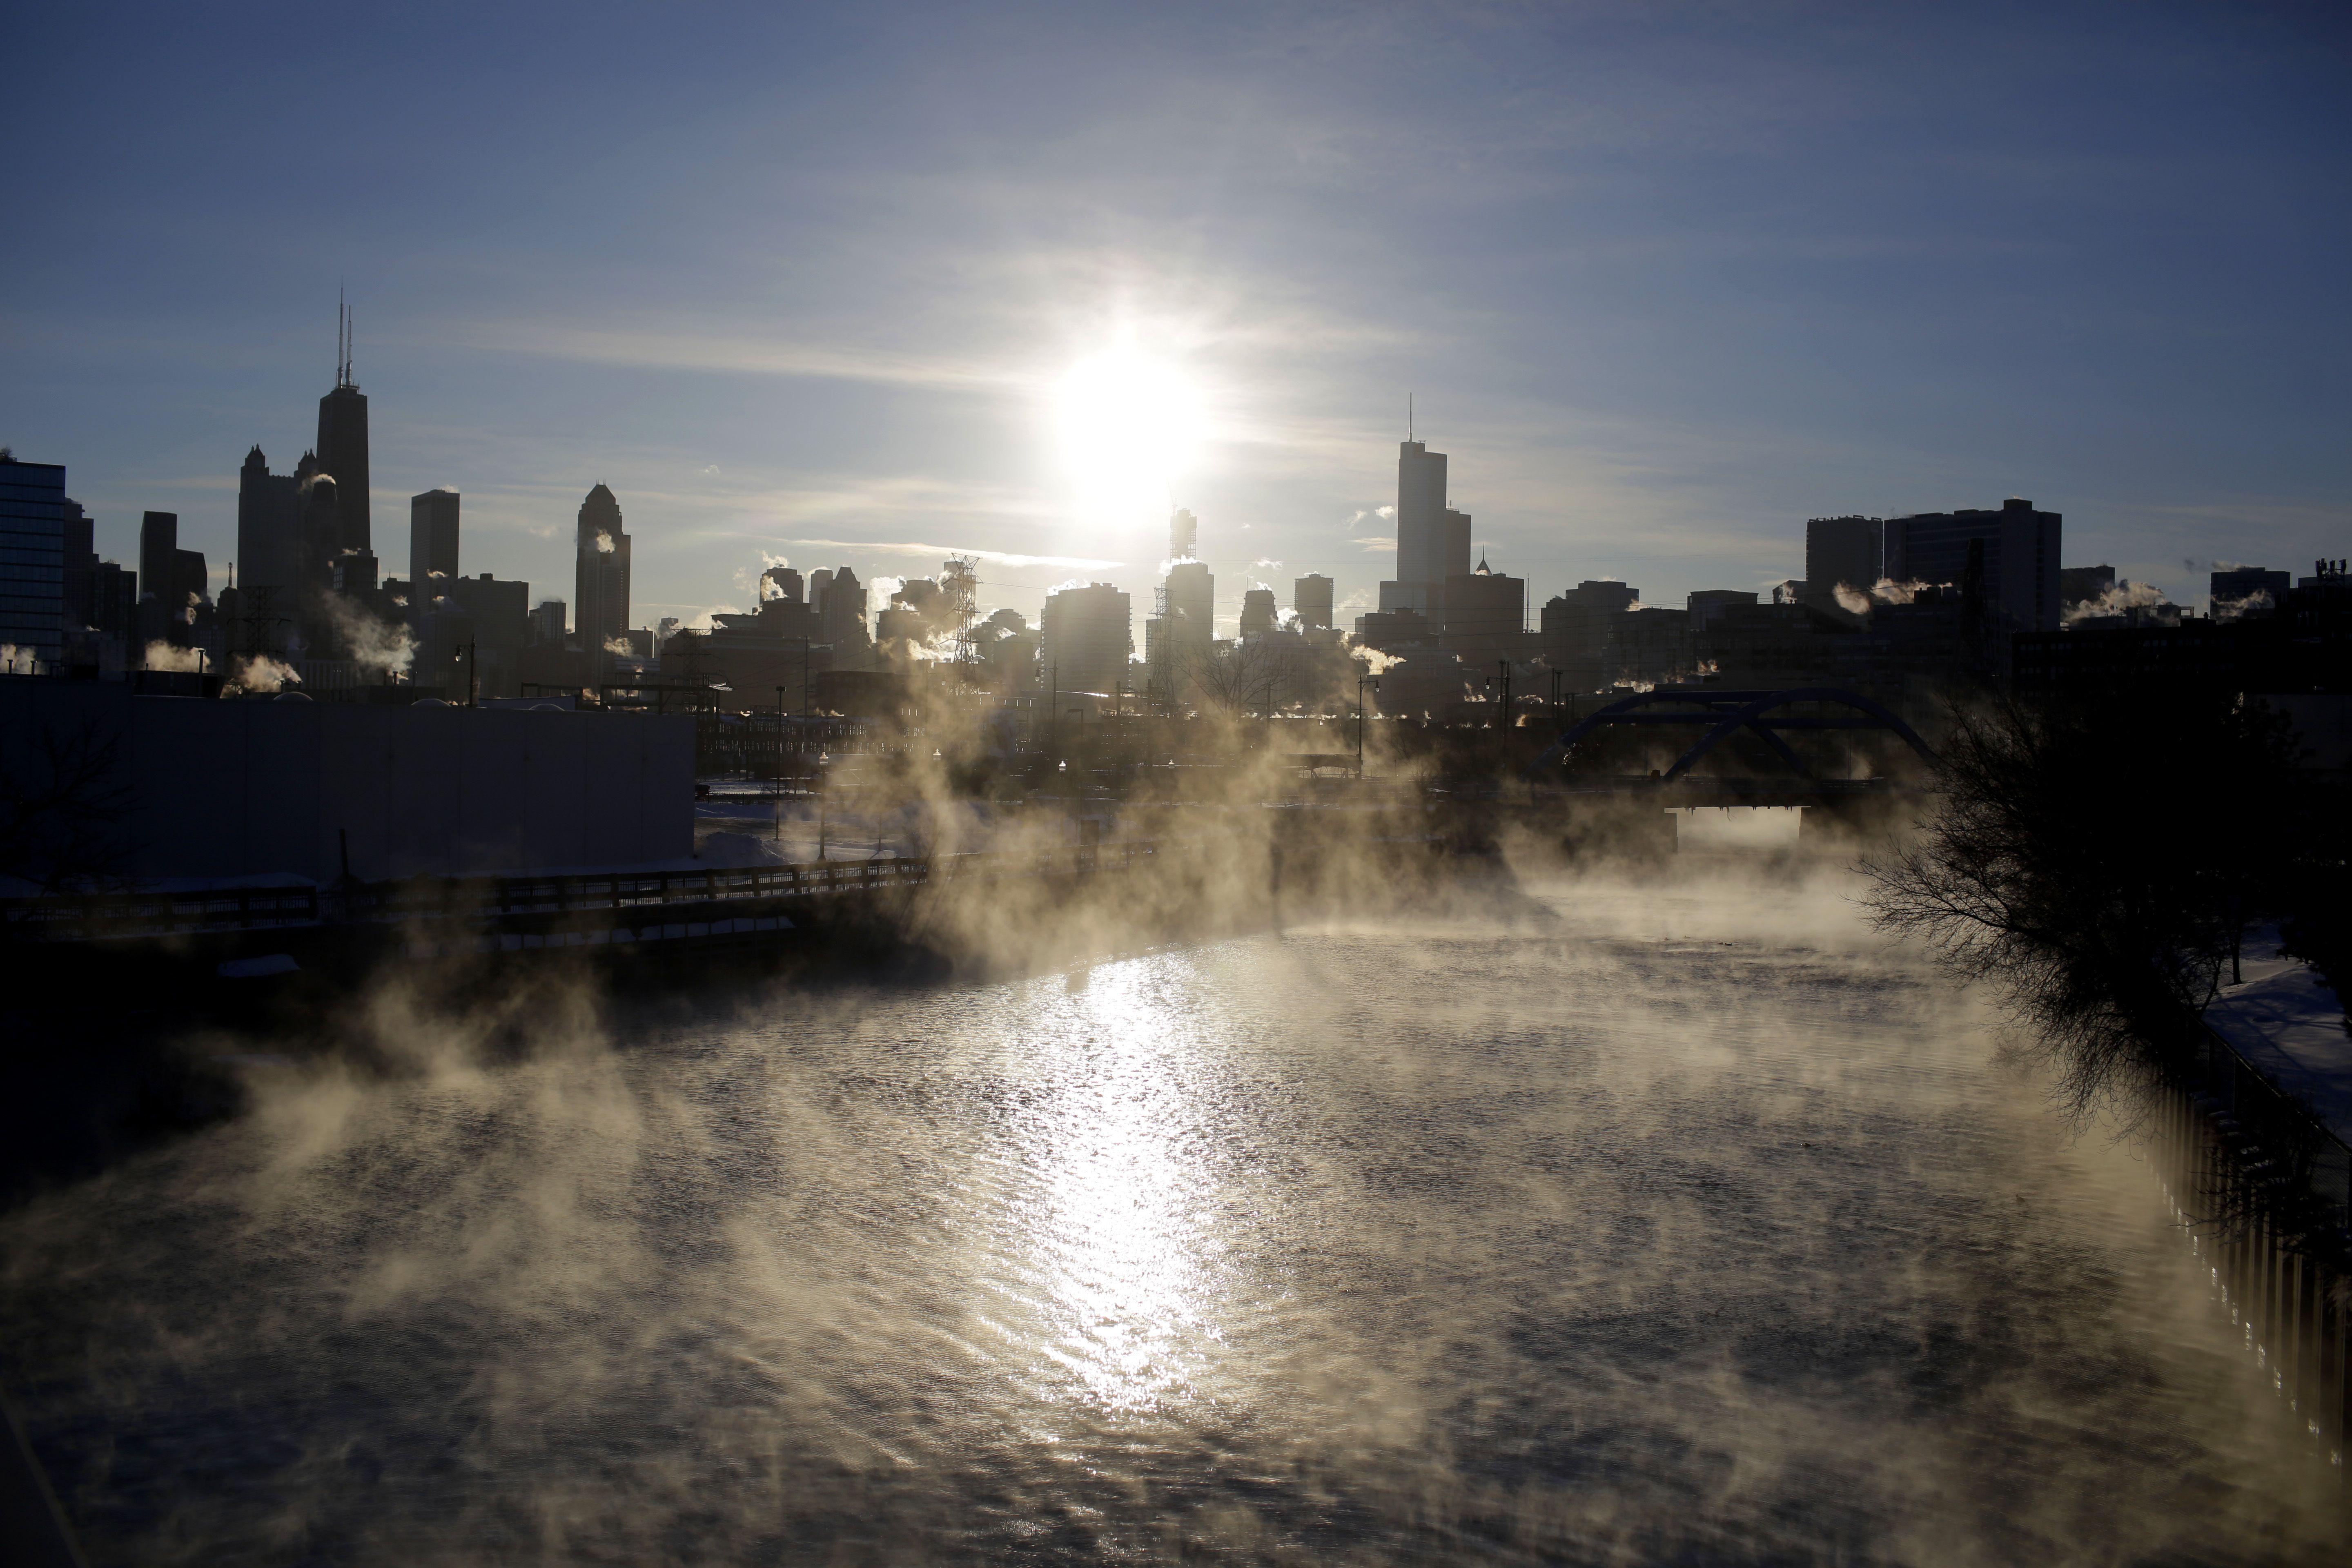 Steam rising from the Chicago river because the air is so cold. 